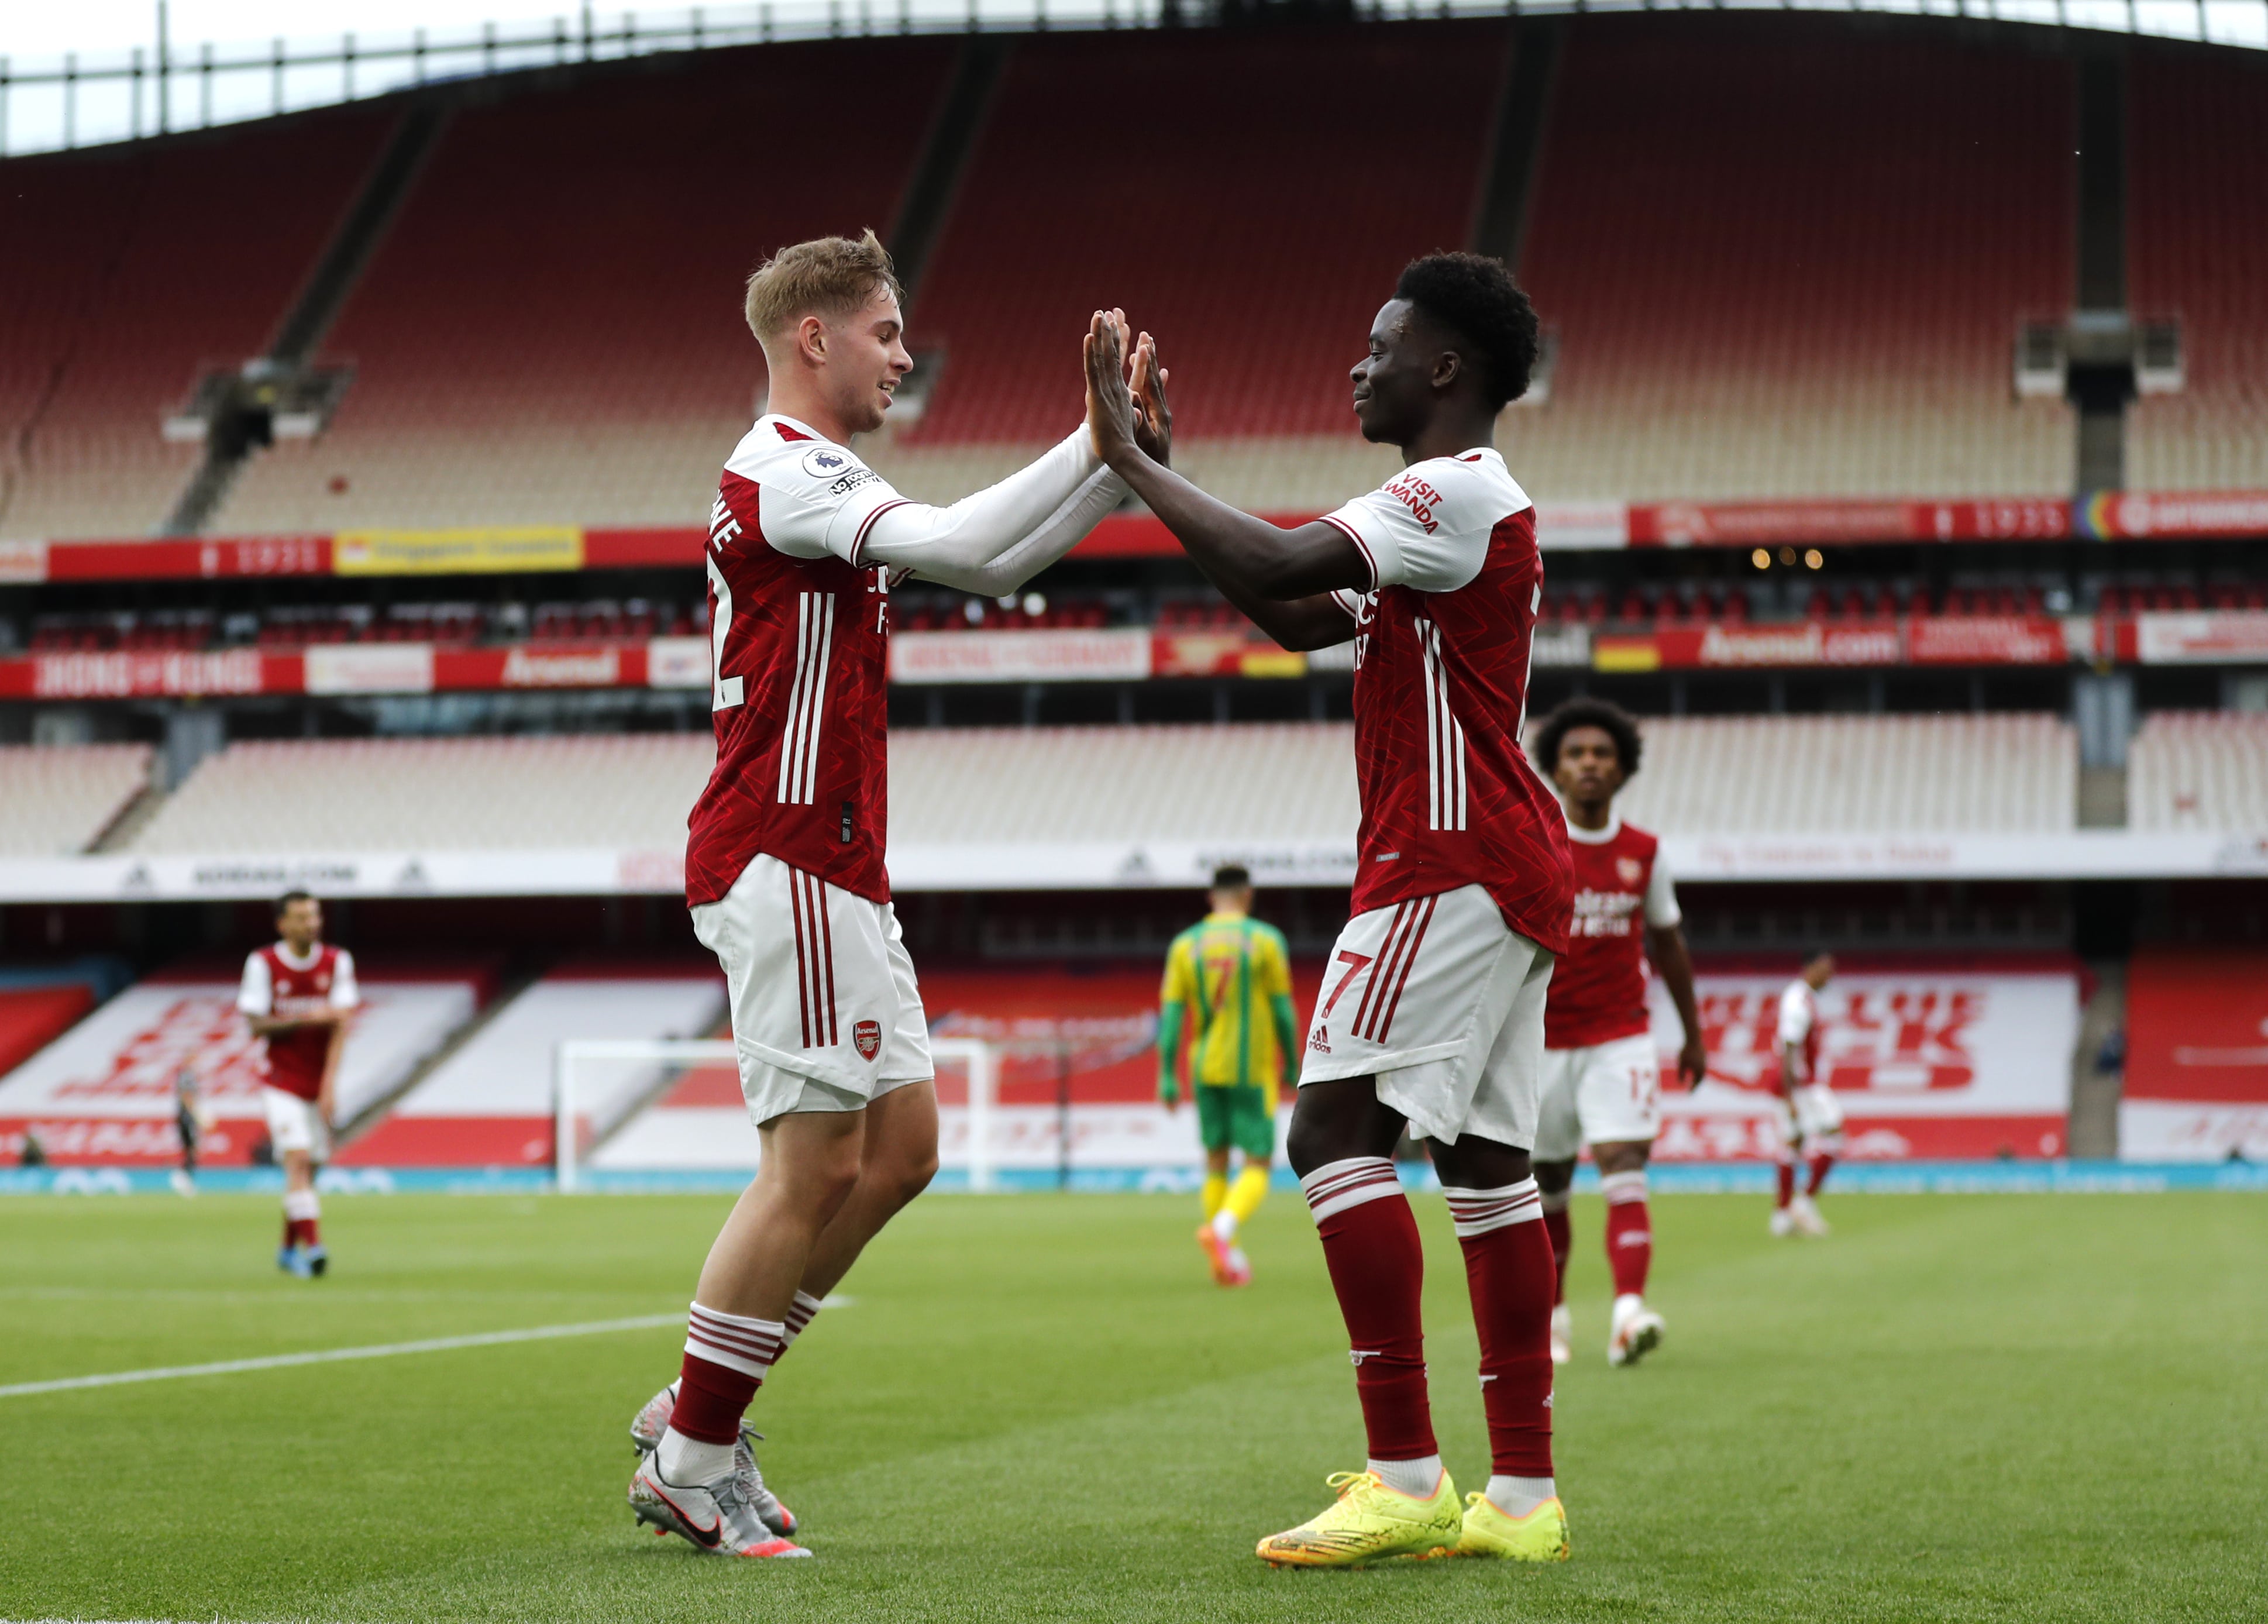 Arsenal need to sort out their team if they don't want Smith Rowe and Saka to leave, proclaims Ian Wright